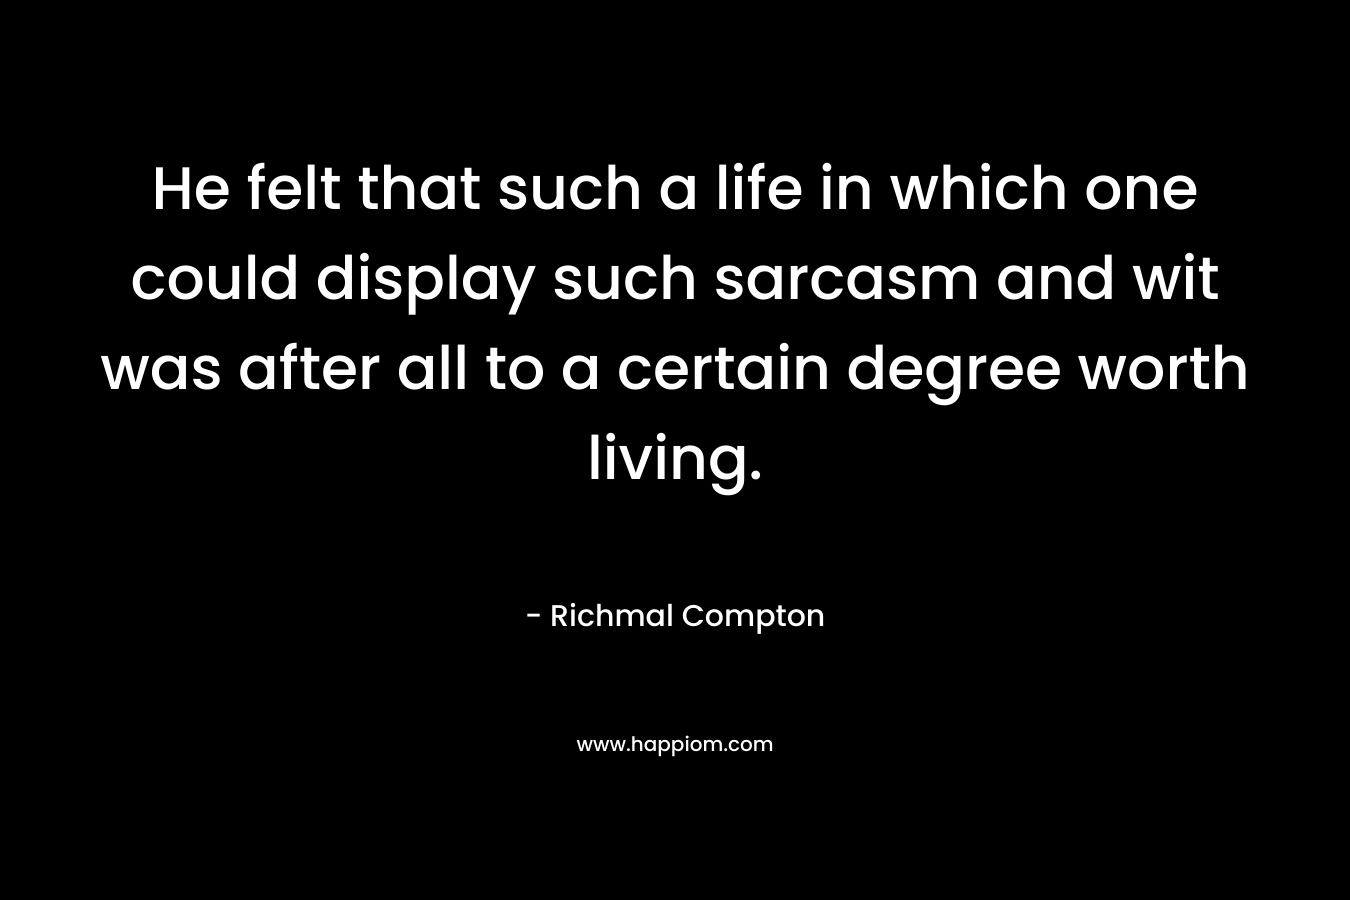 He felt that such a life in which one could display such sarcasm and wit was after all to a certain degree worth living.